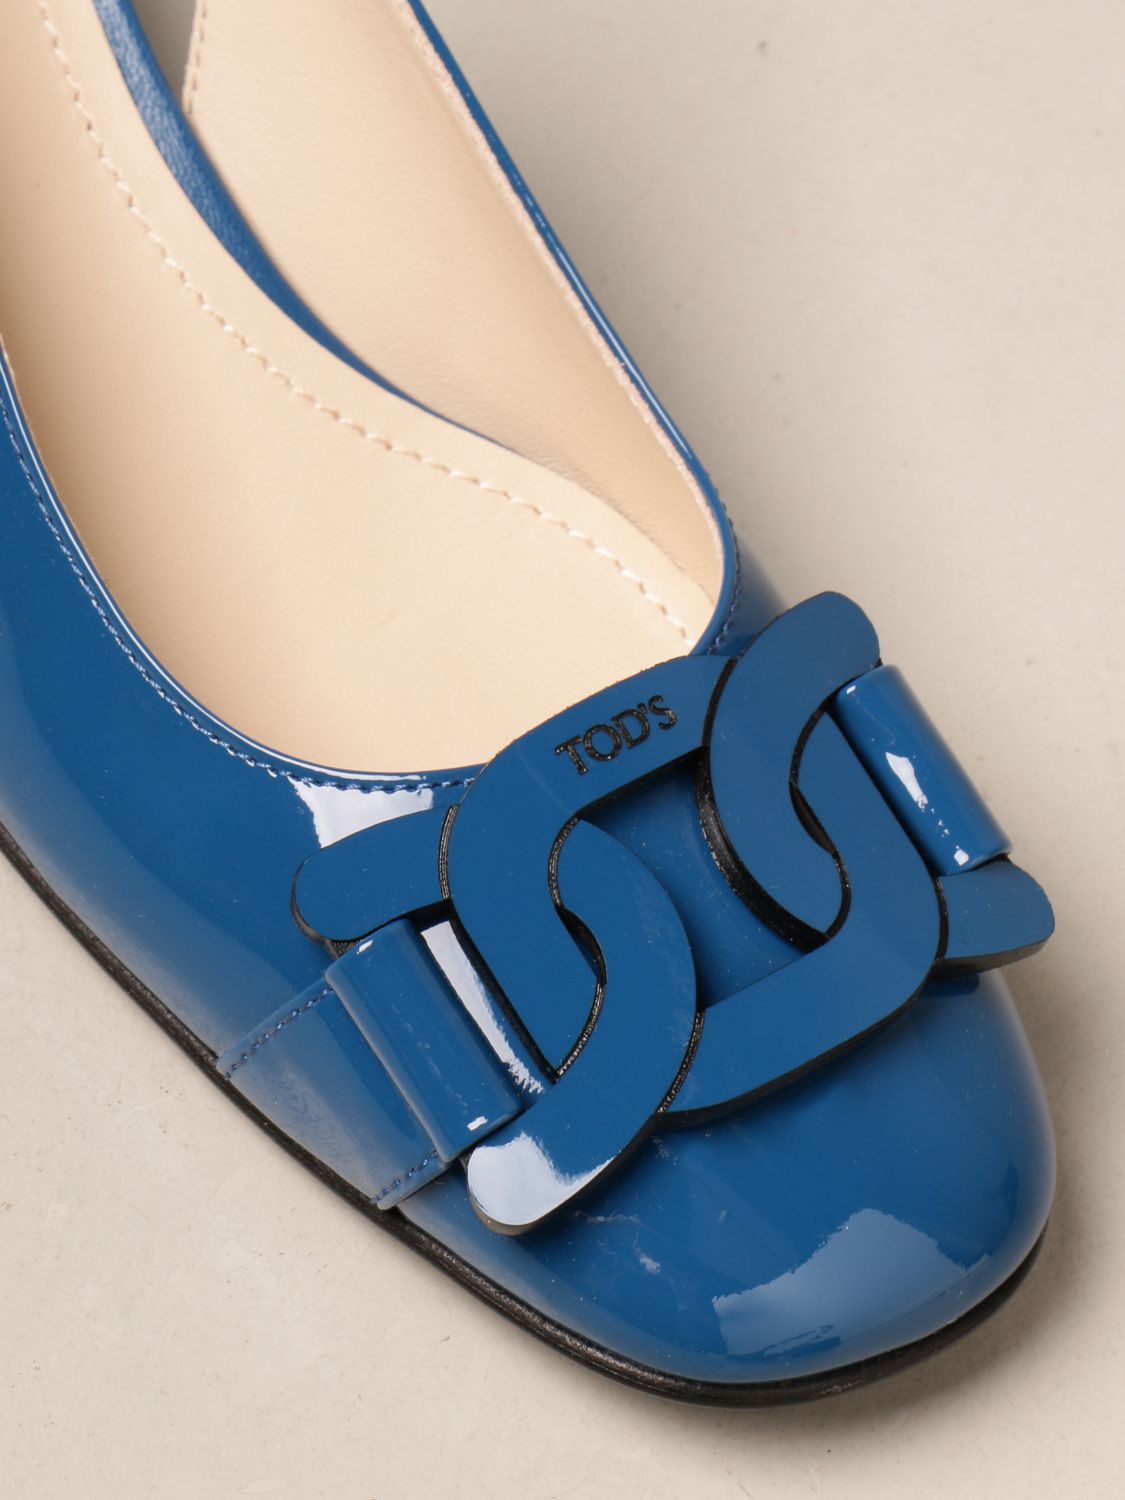 Buy > tod's chaussure femme > in stock